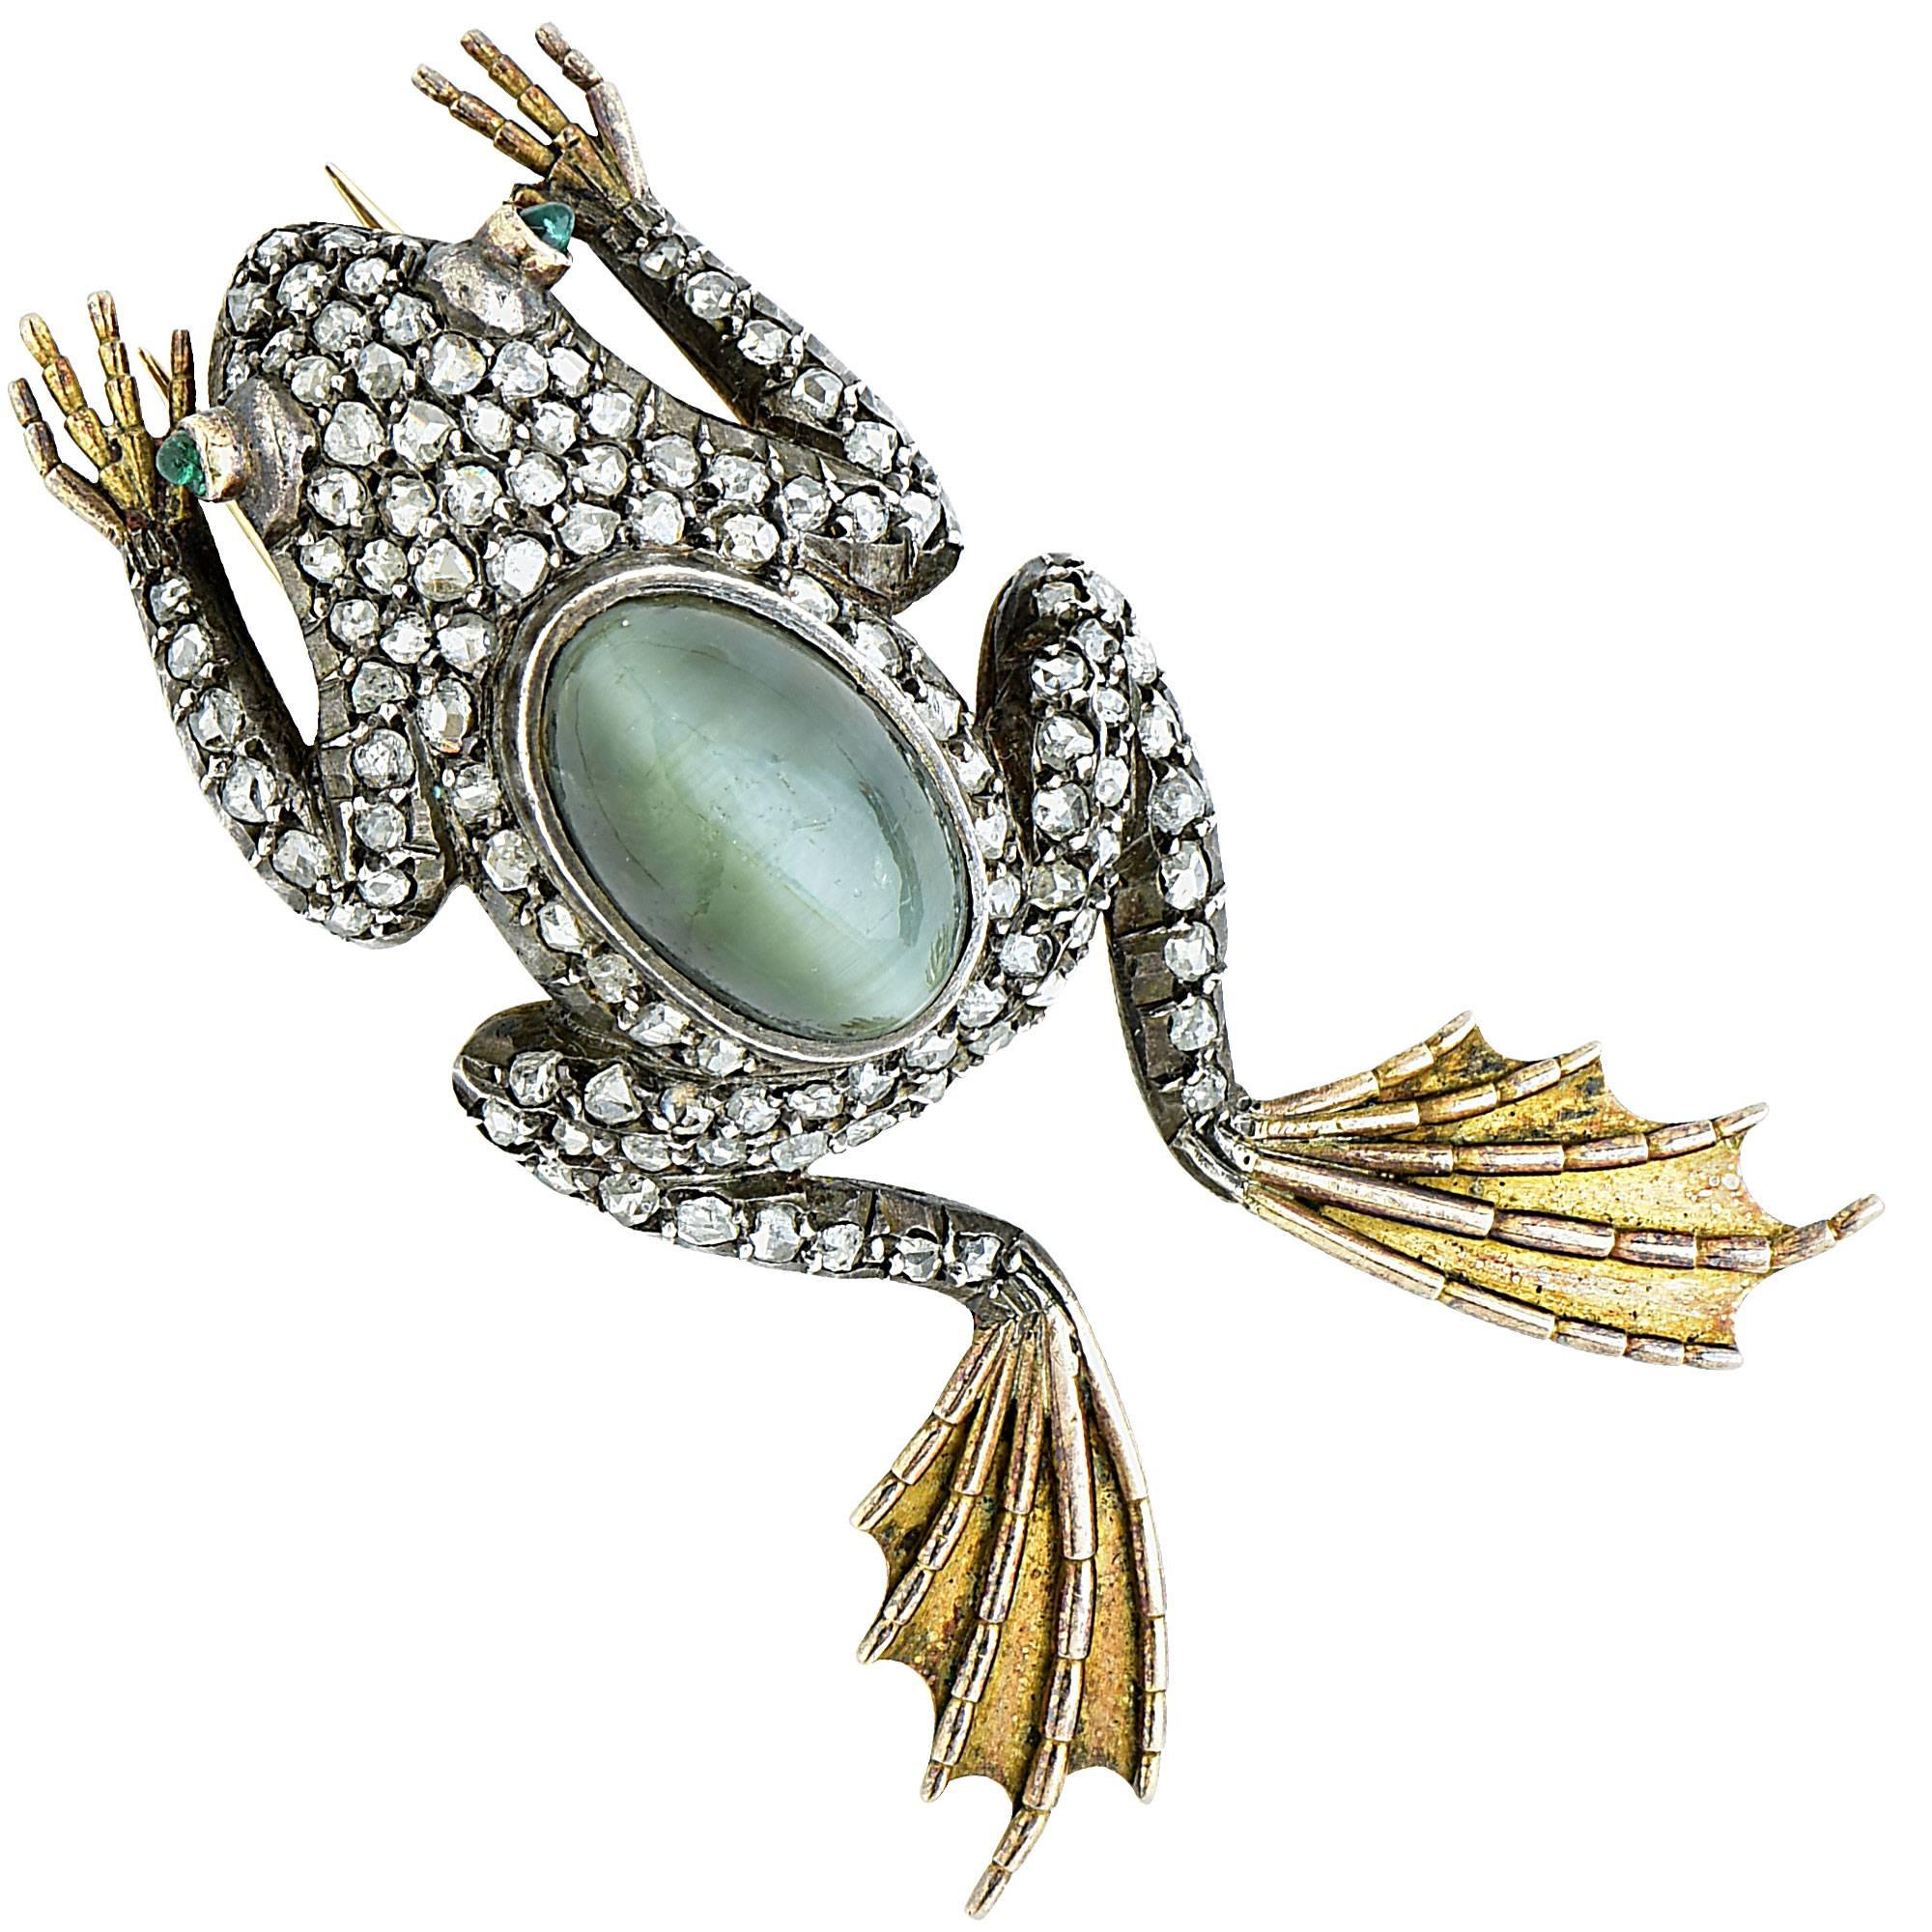 Victorian silver over gold frog brooch featuring 111 rose cut diamonds weighing approximately 1.70cts total, G color VS-SI clarity.

The metal weight is 13.52 grams.

This diamond brooch is accompanied by a retail appraisal performed by a GIA